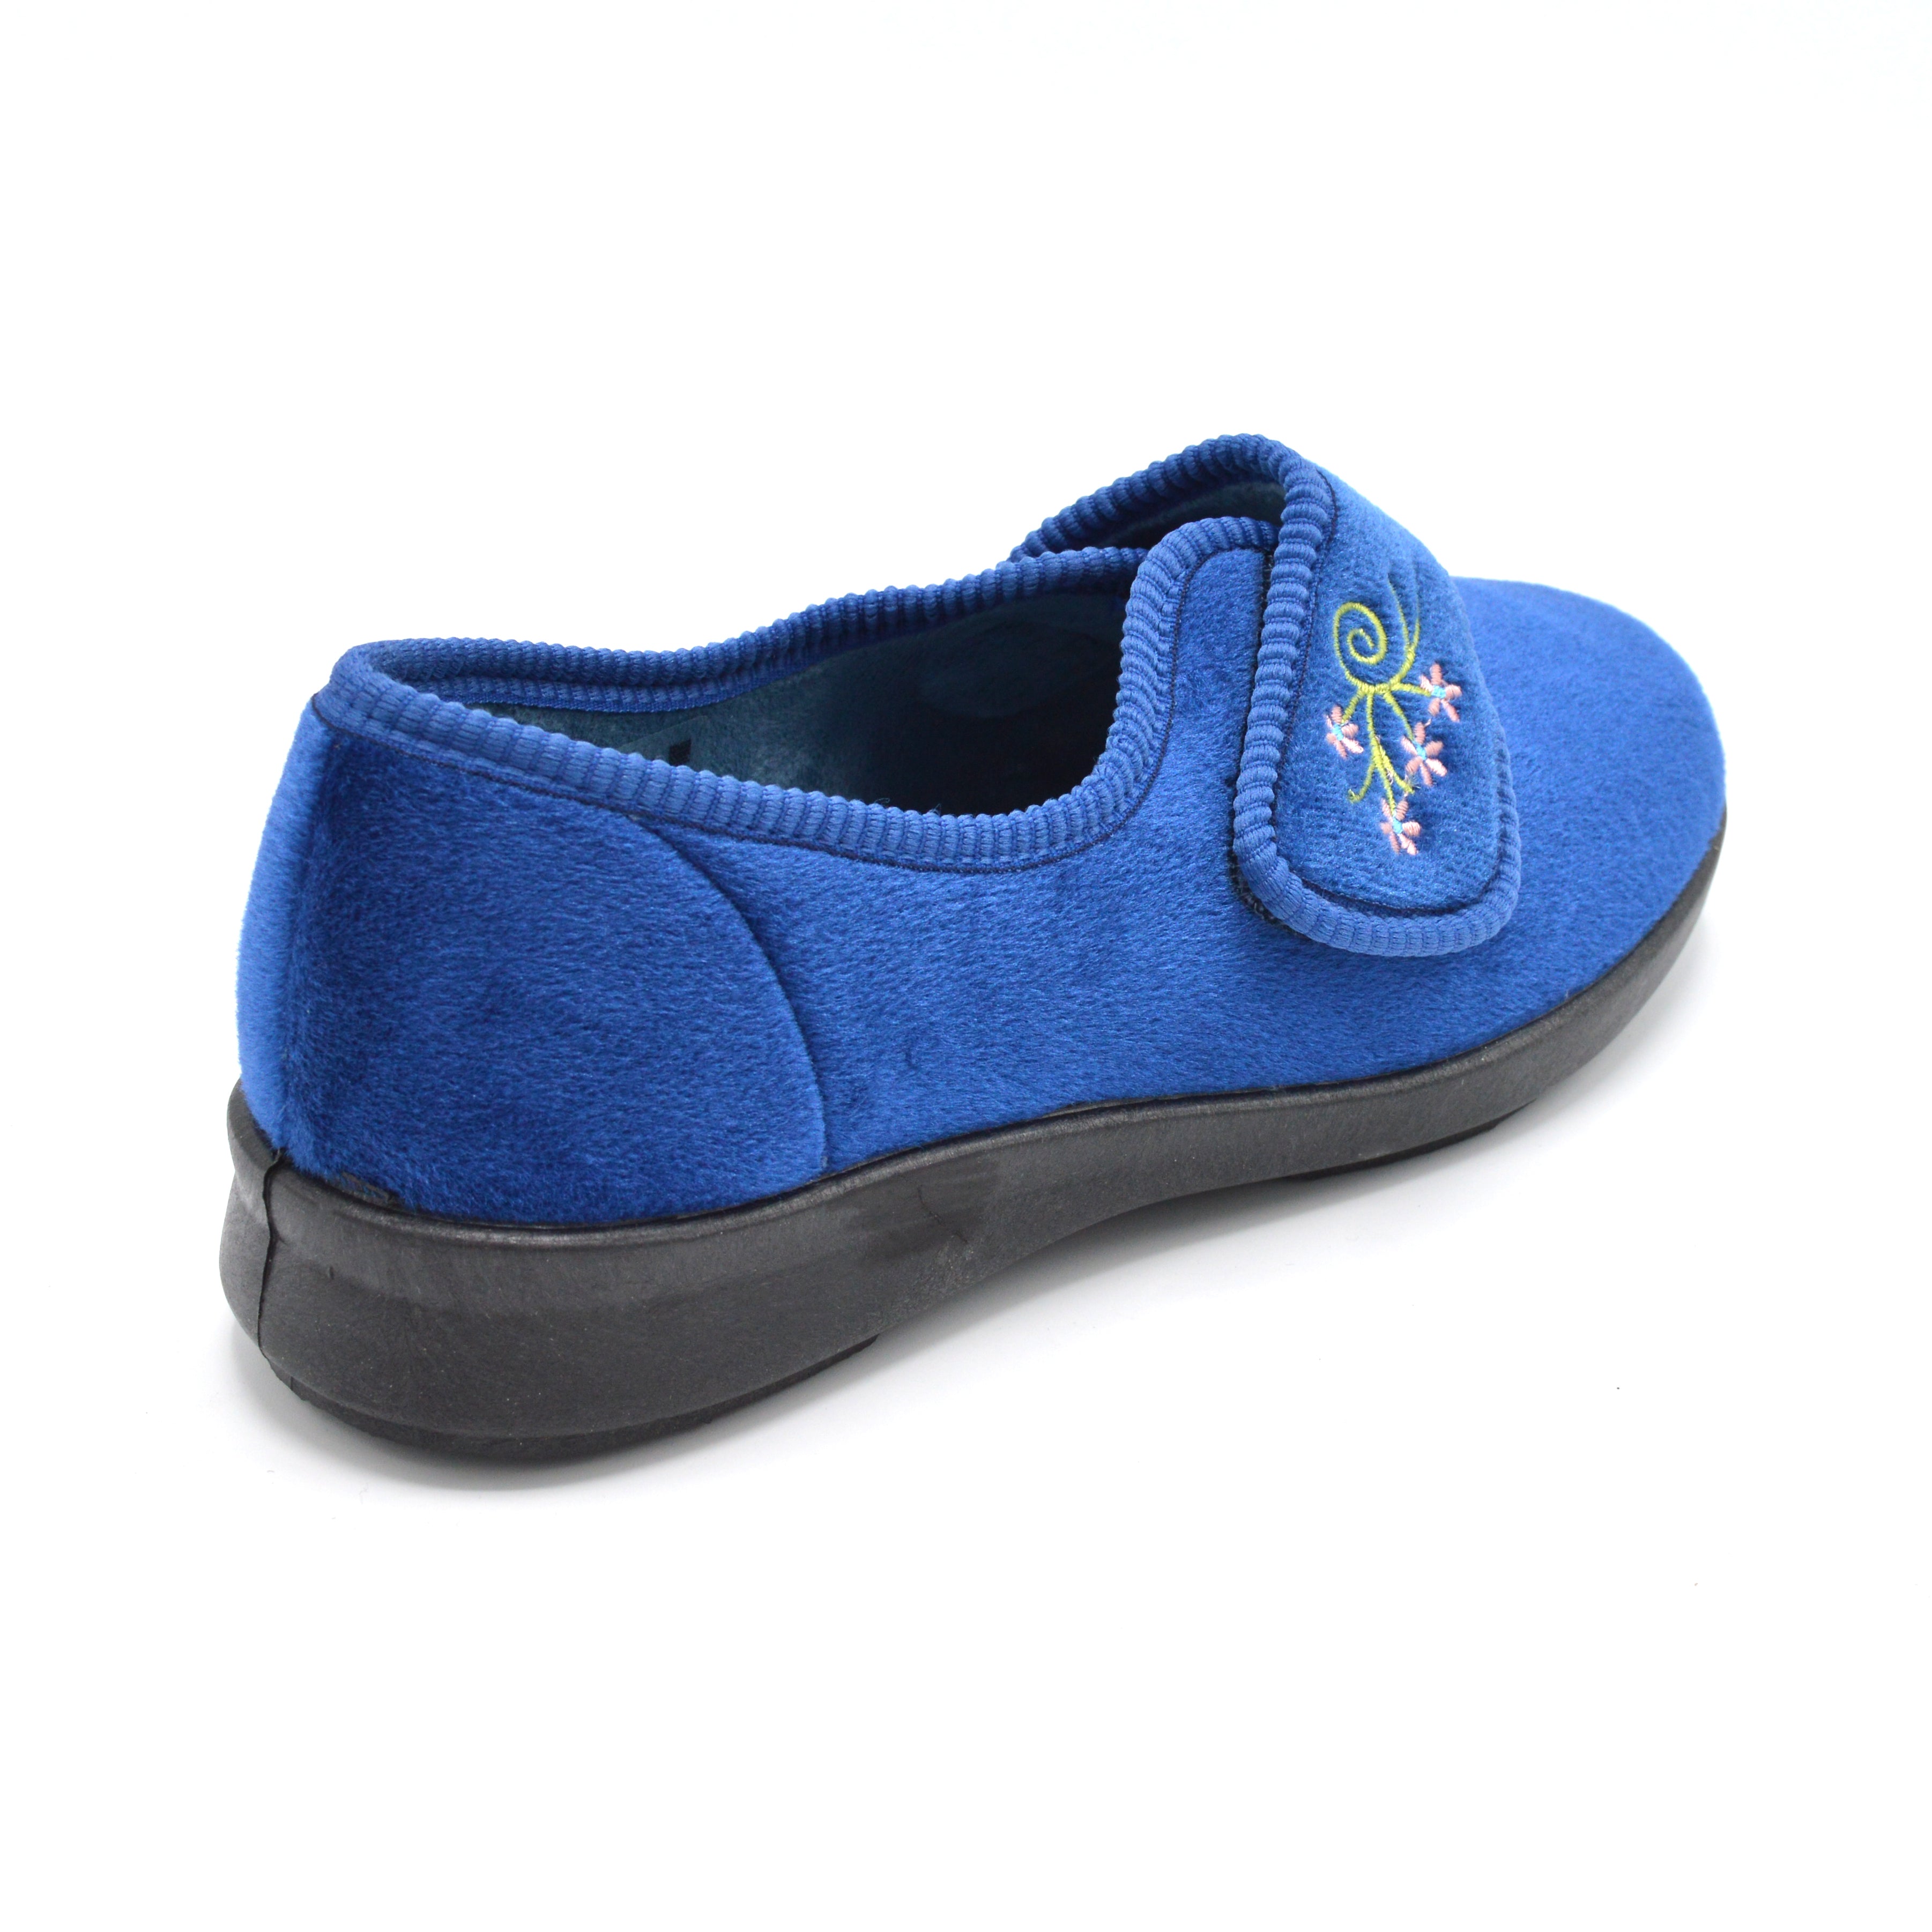 High-Quality Velcro Slippers For Diabetes